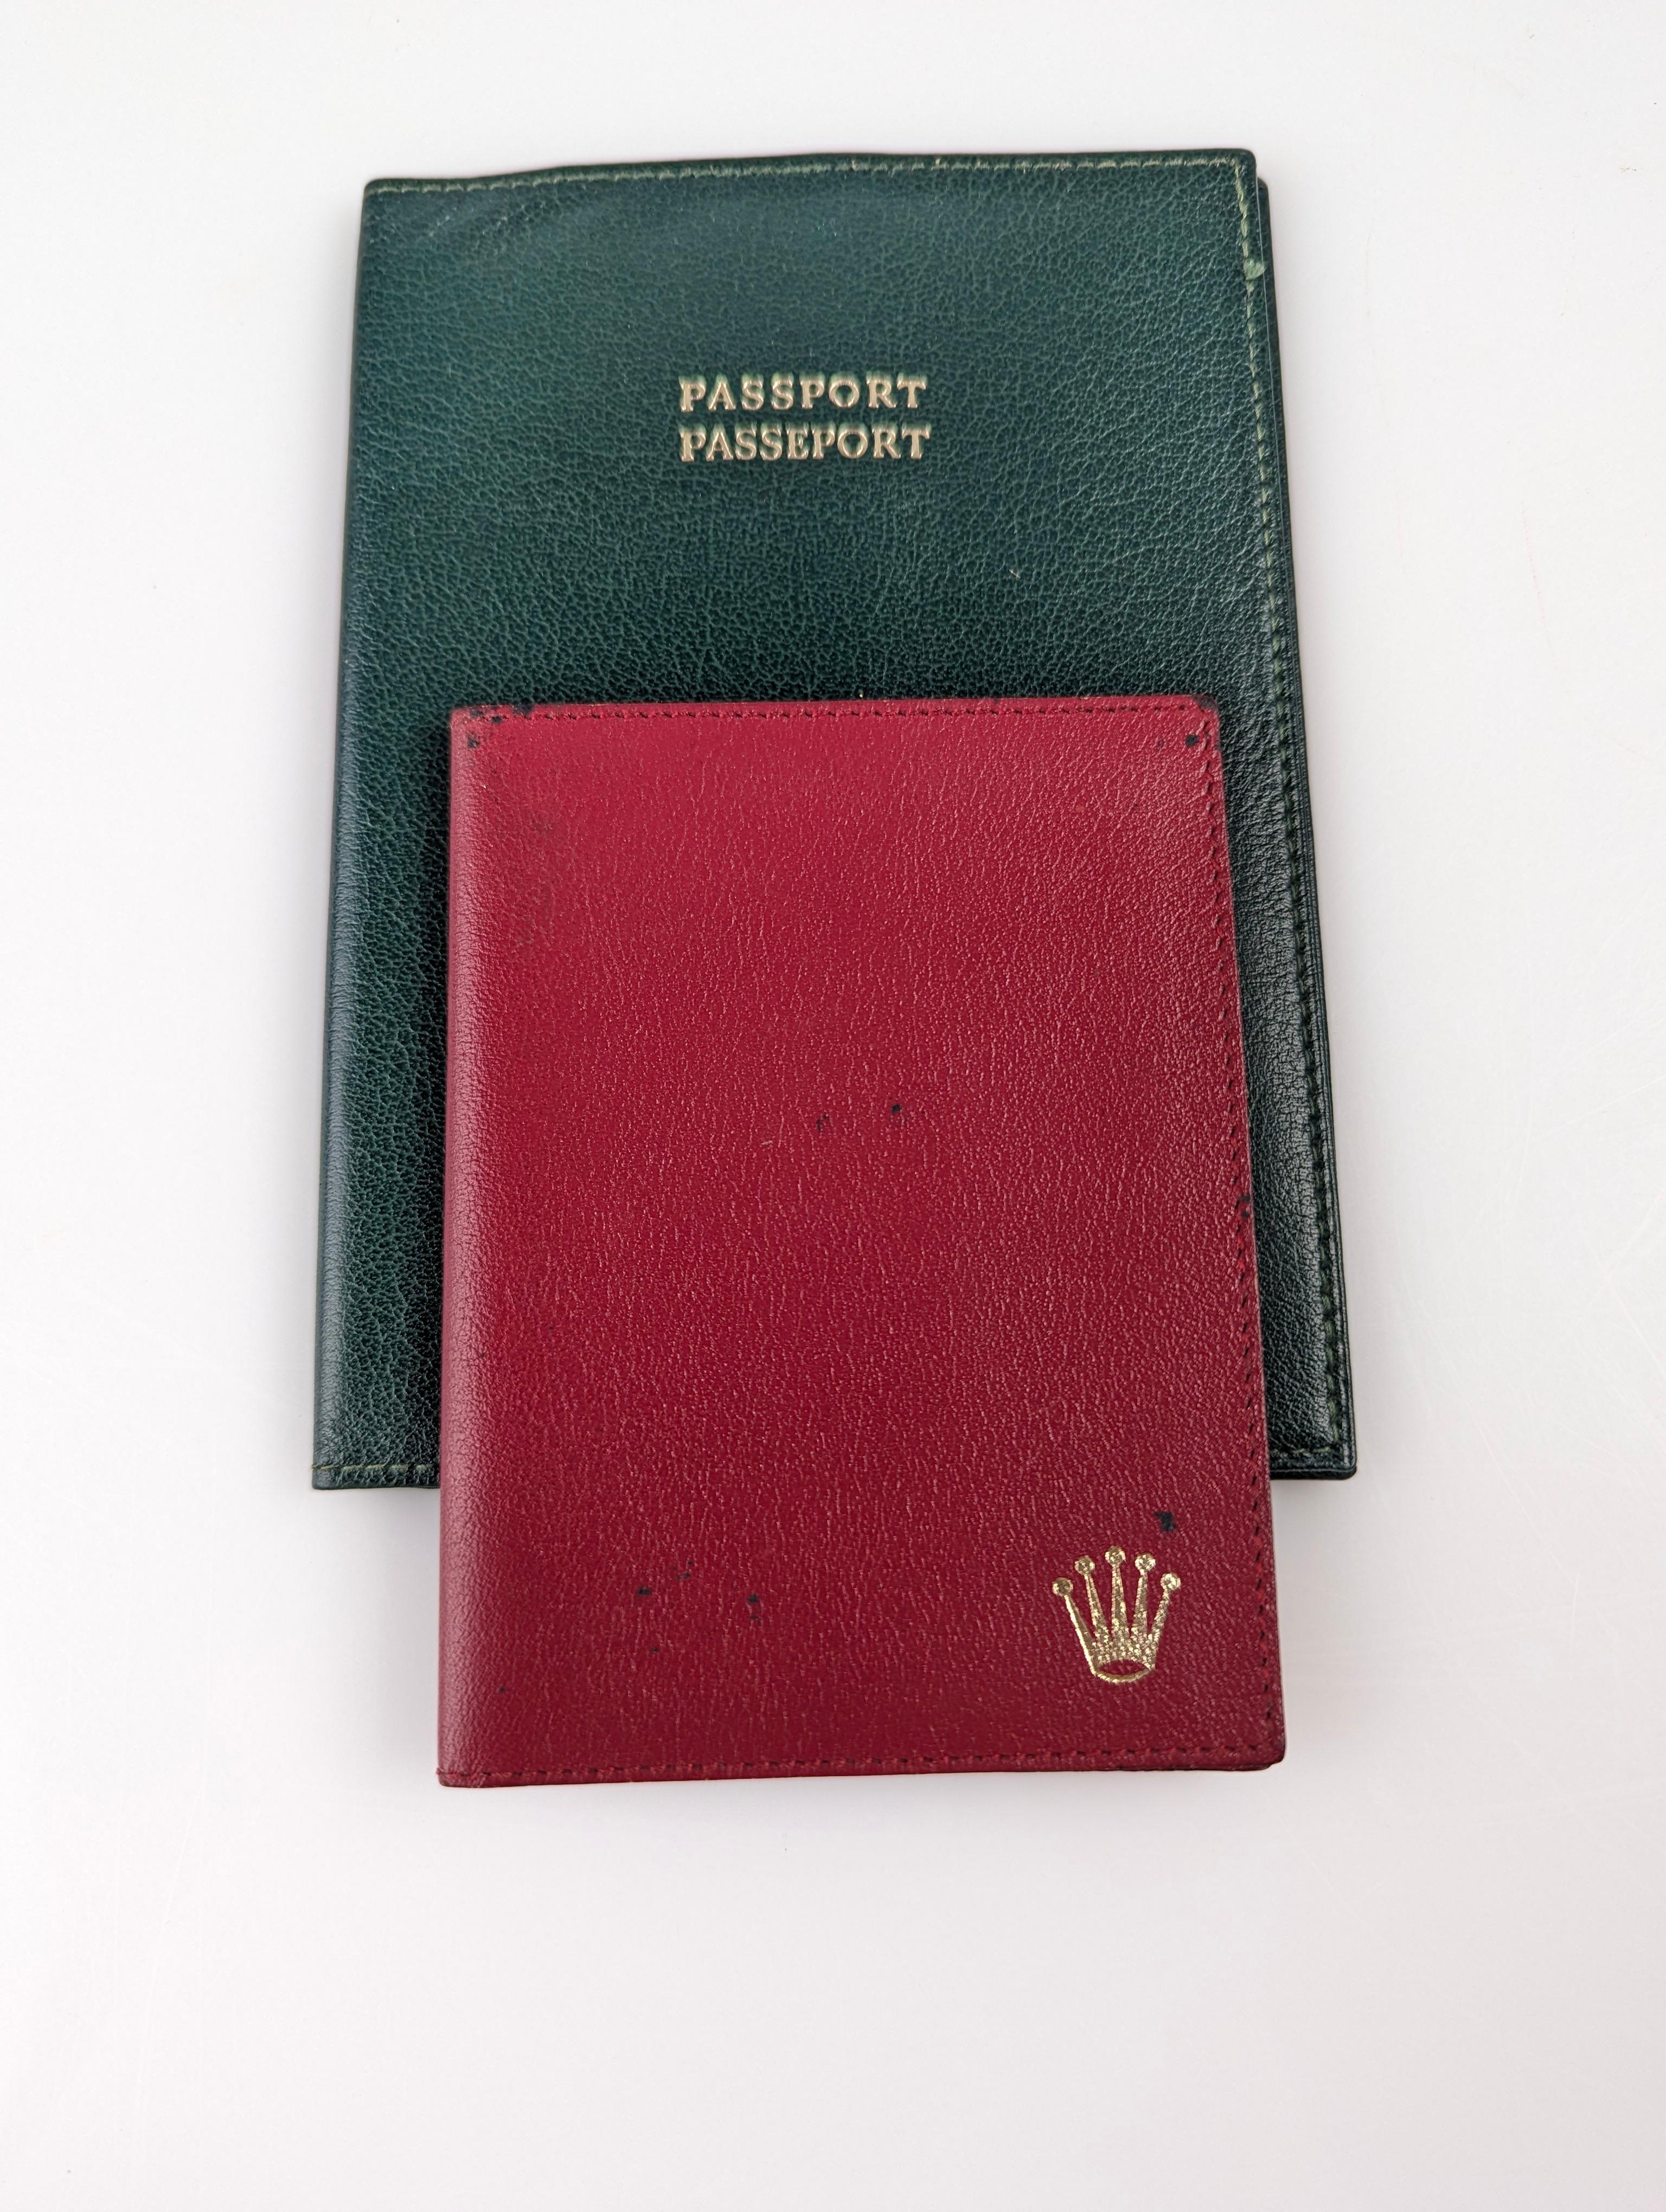 Red wallet and green passport wallet in leather by Rolex.